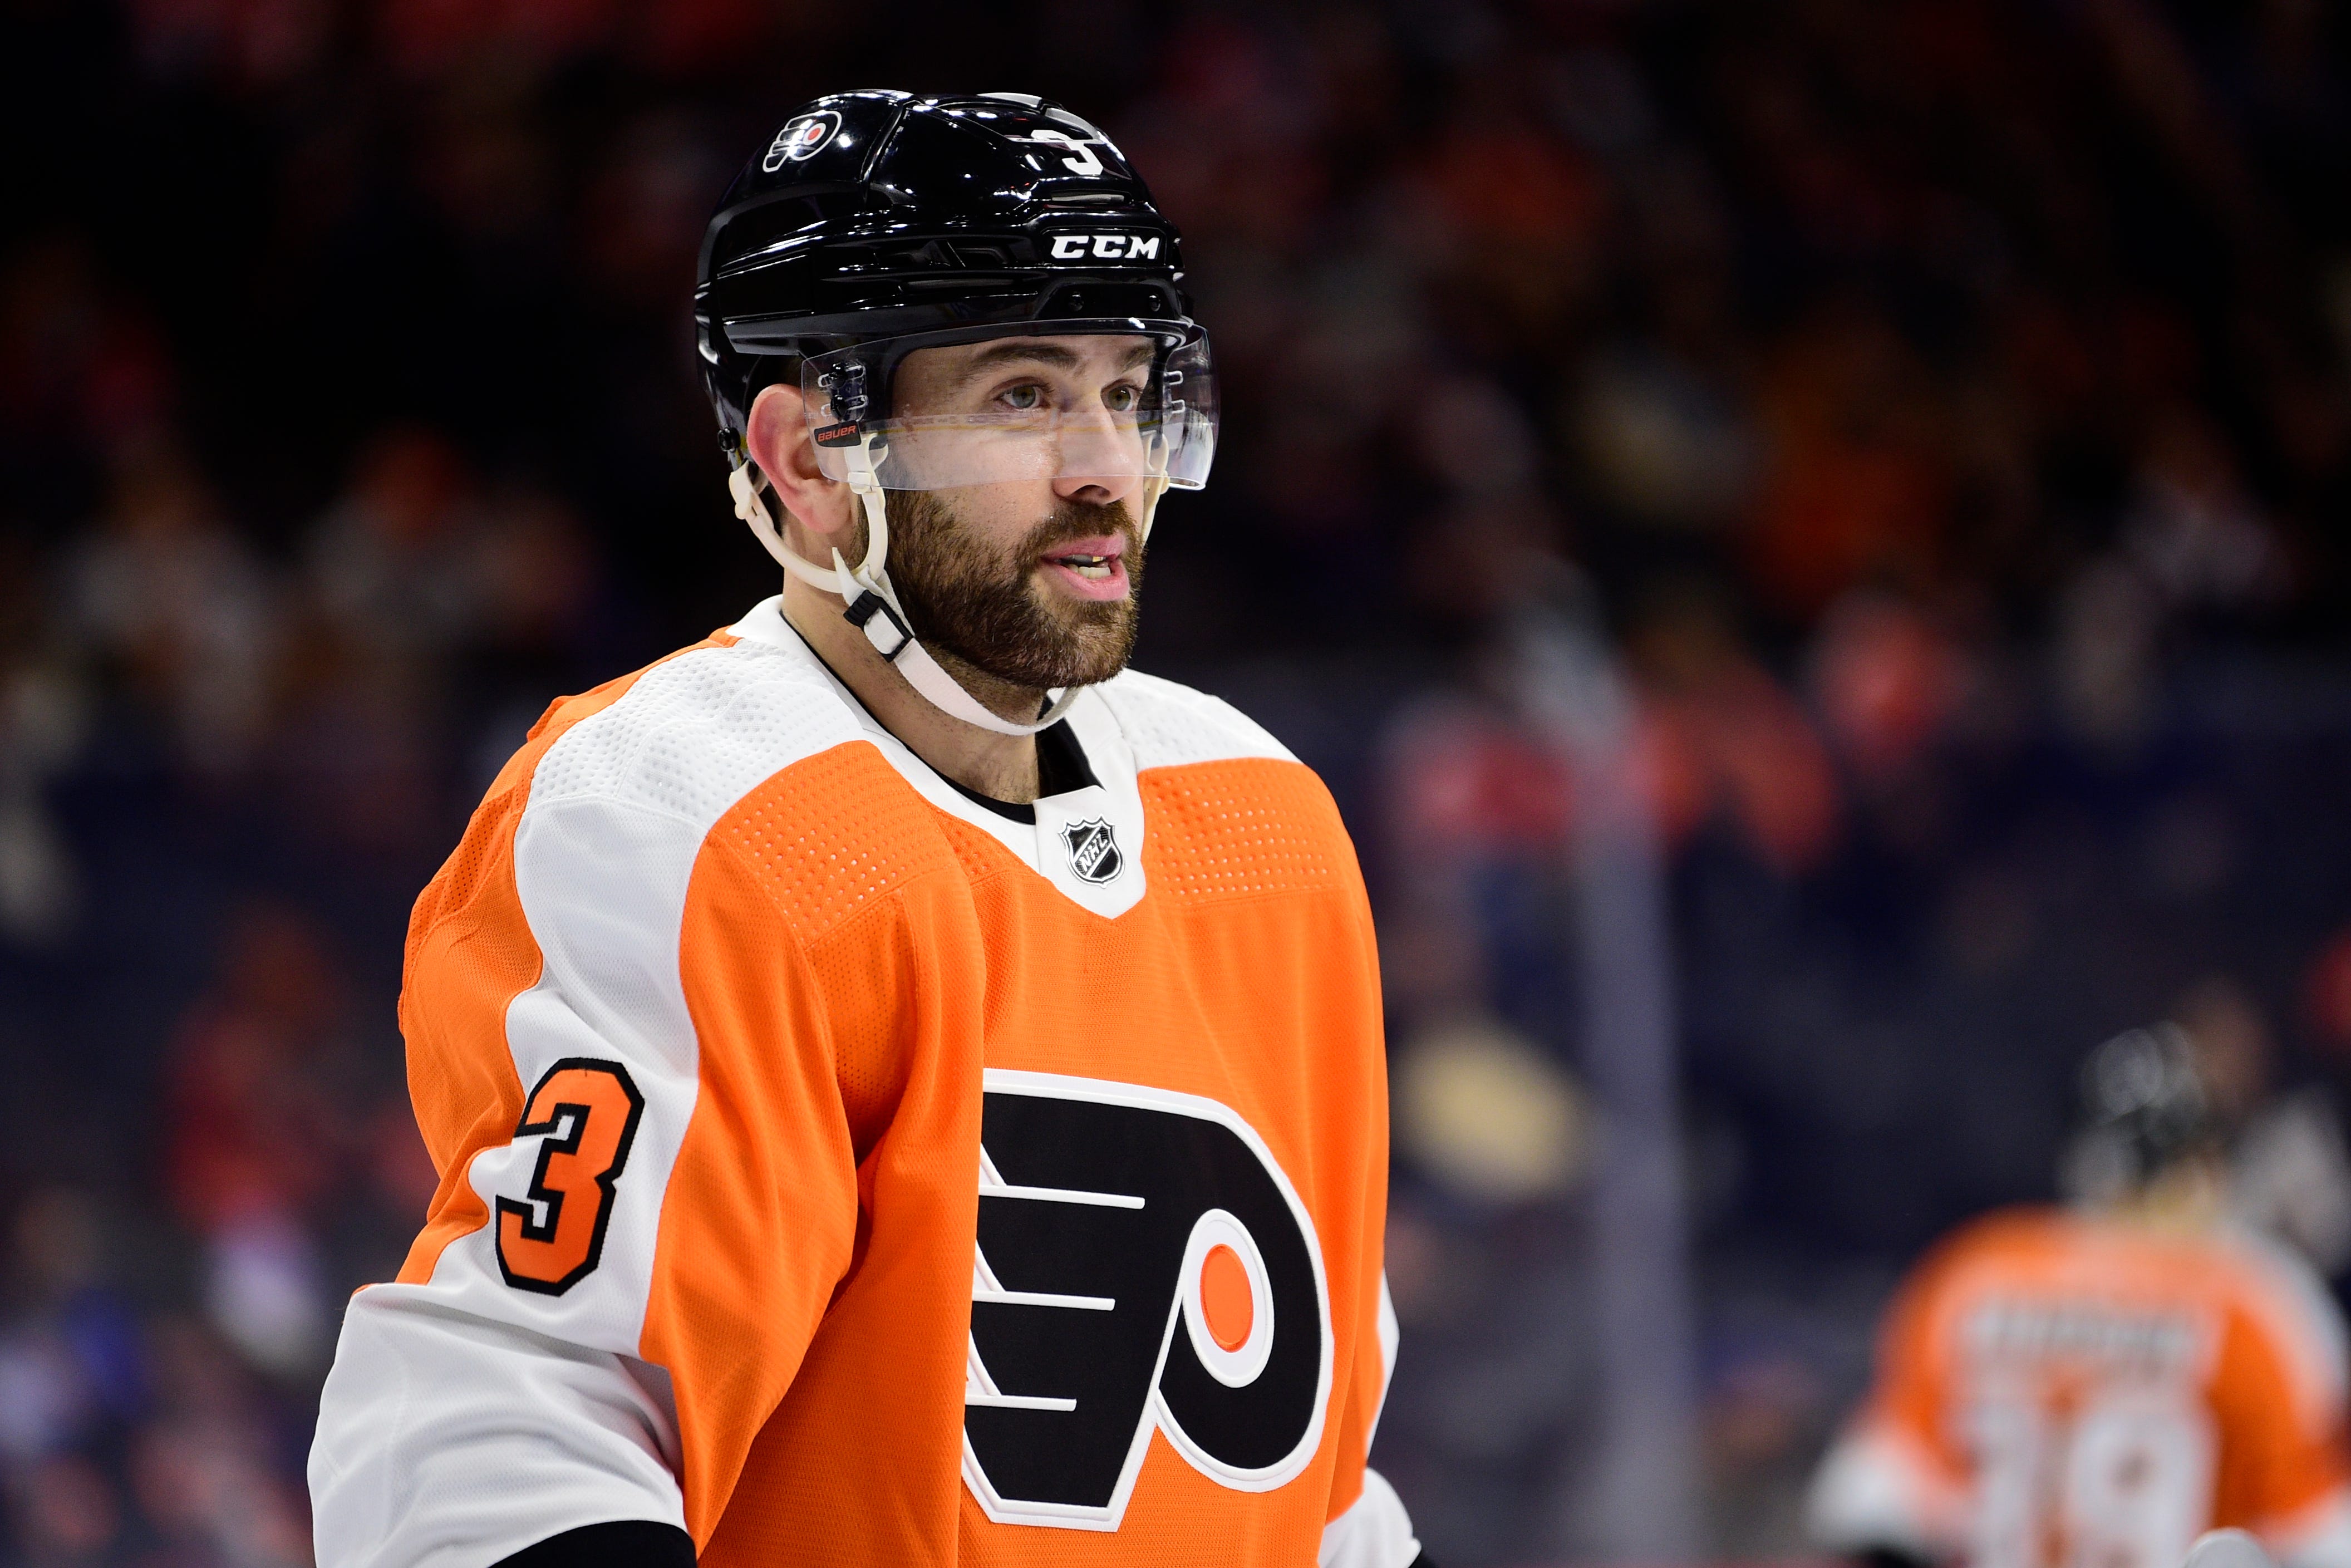 Flyers' Keith Yandle cherishes Bobby Orr’s advice as NHL ironman record nears